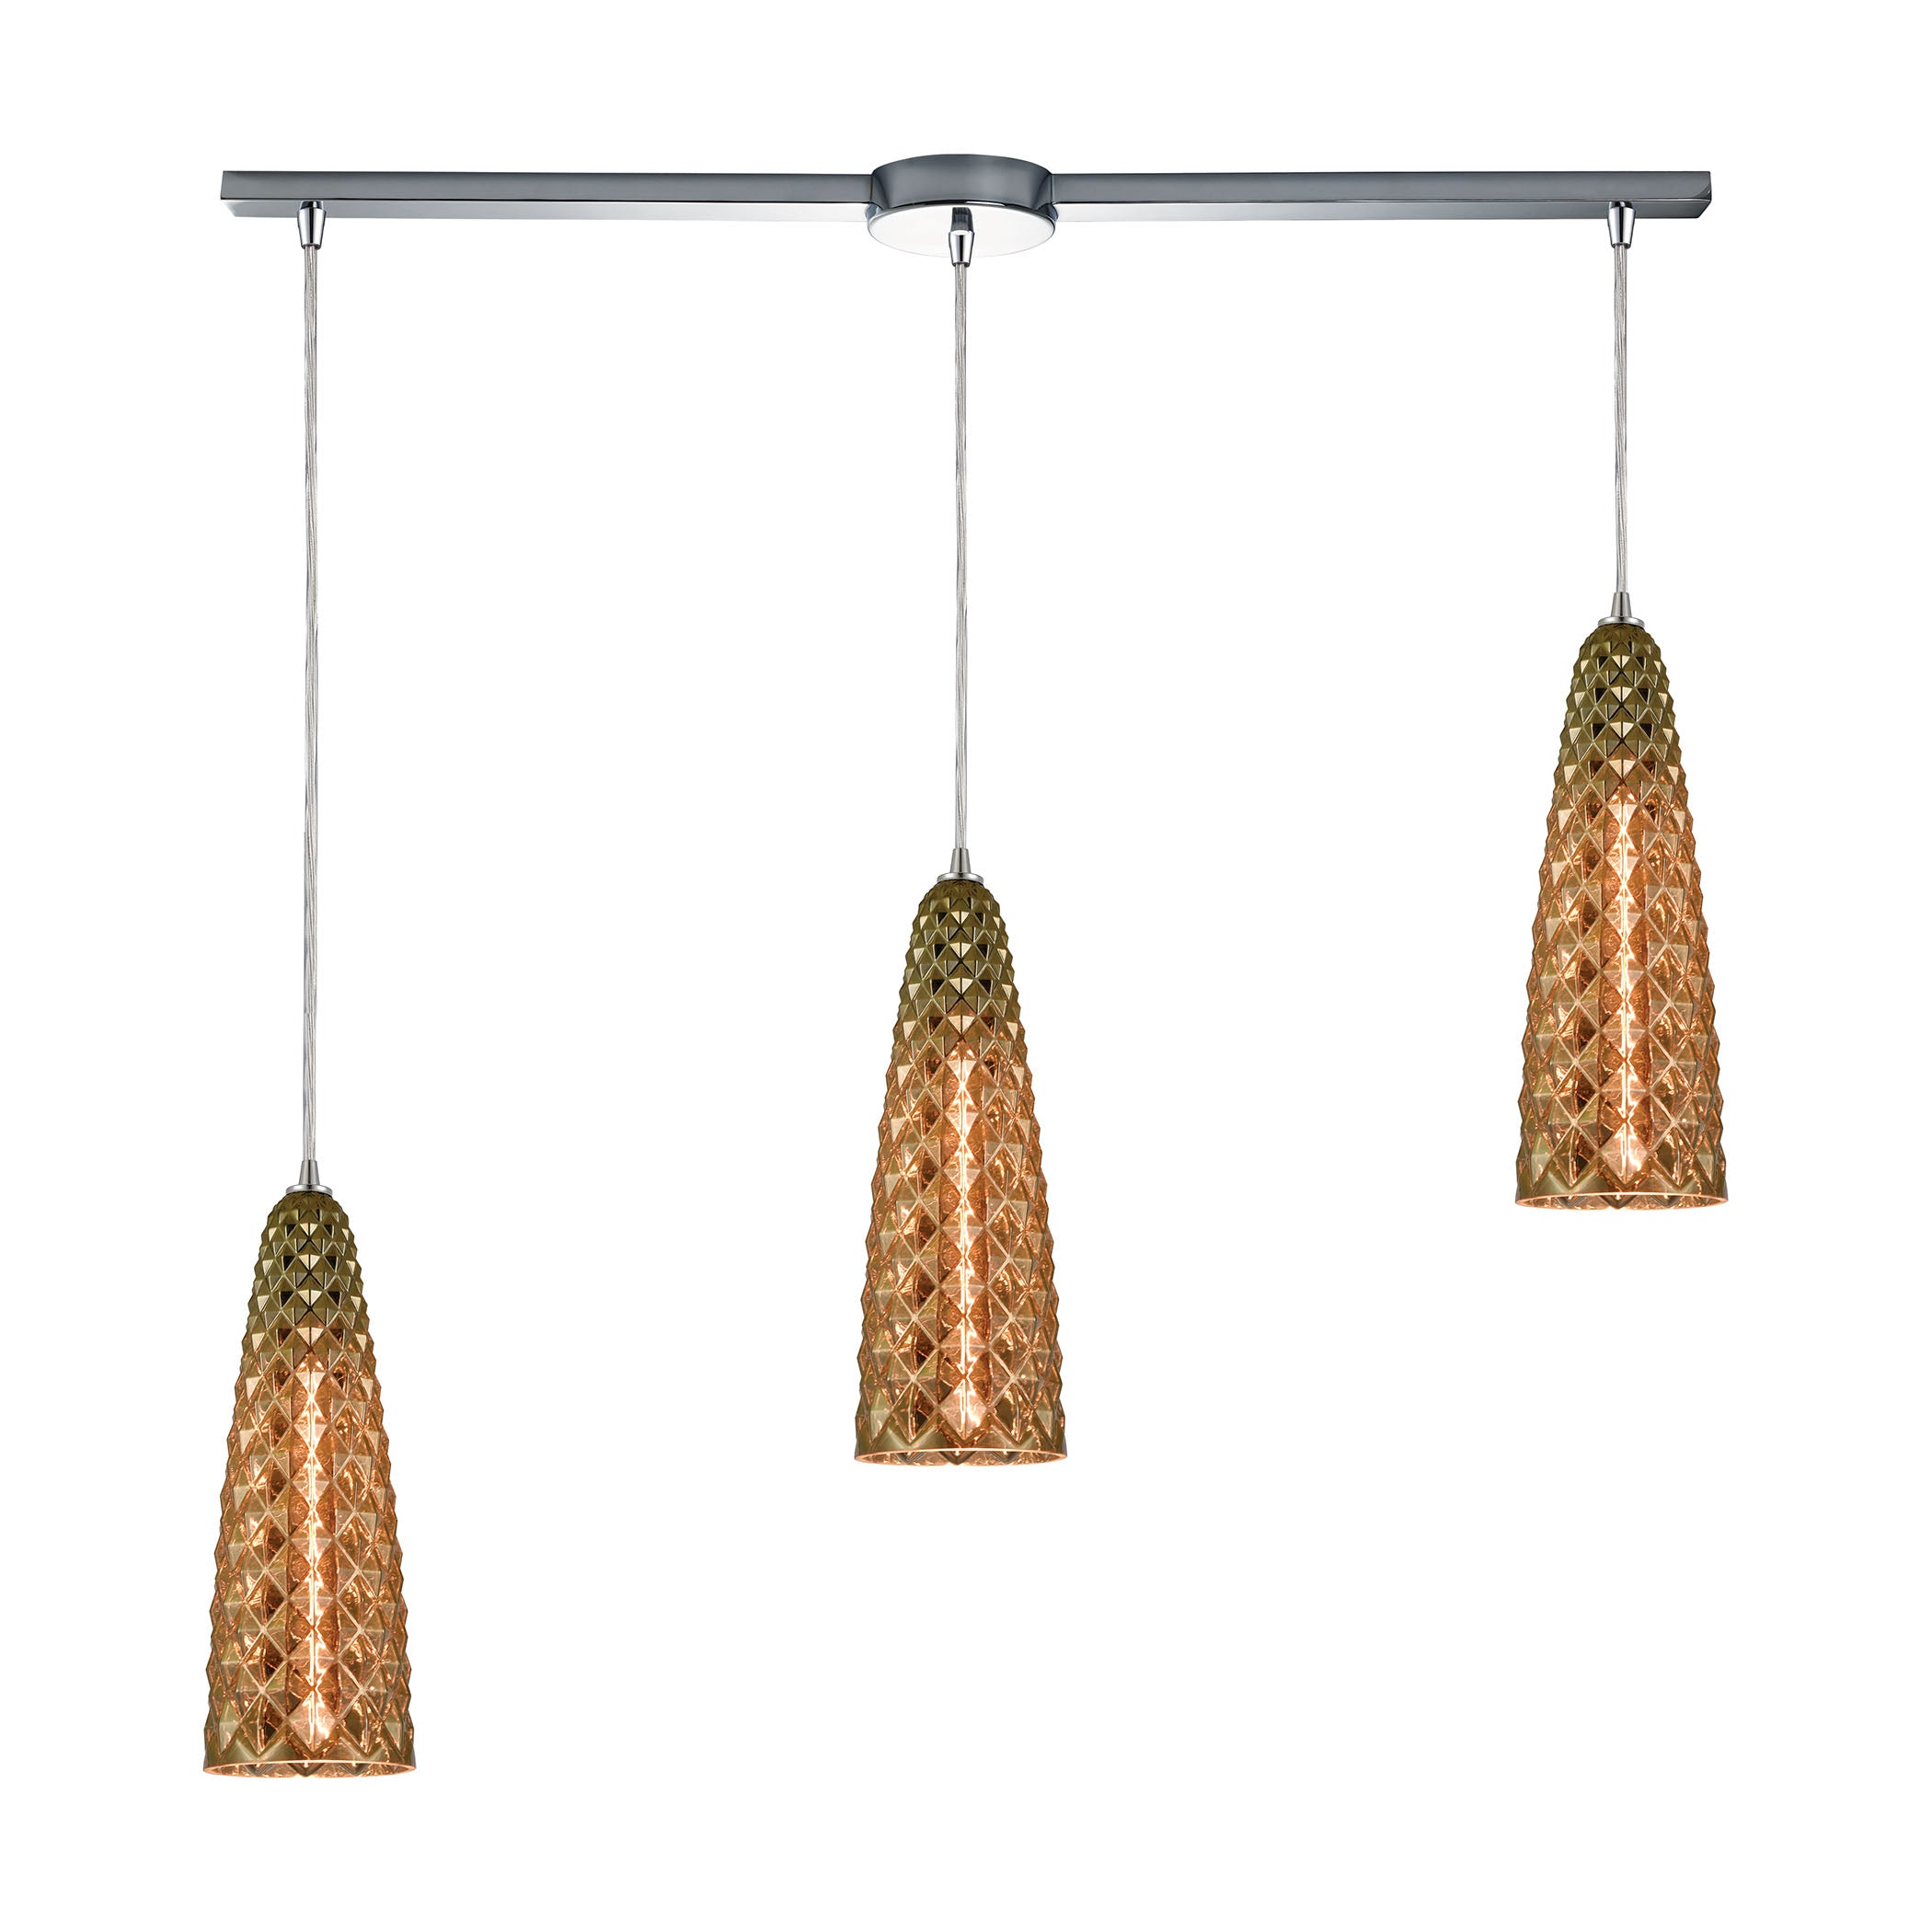 ELK Lighting 21168/3L Glitzy 3-Light Linear Mini Pendant Fixture in Polished Chrome with Golden Bronze Plated Glass